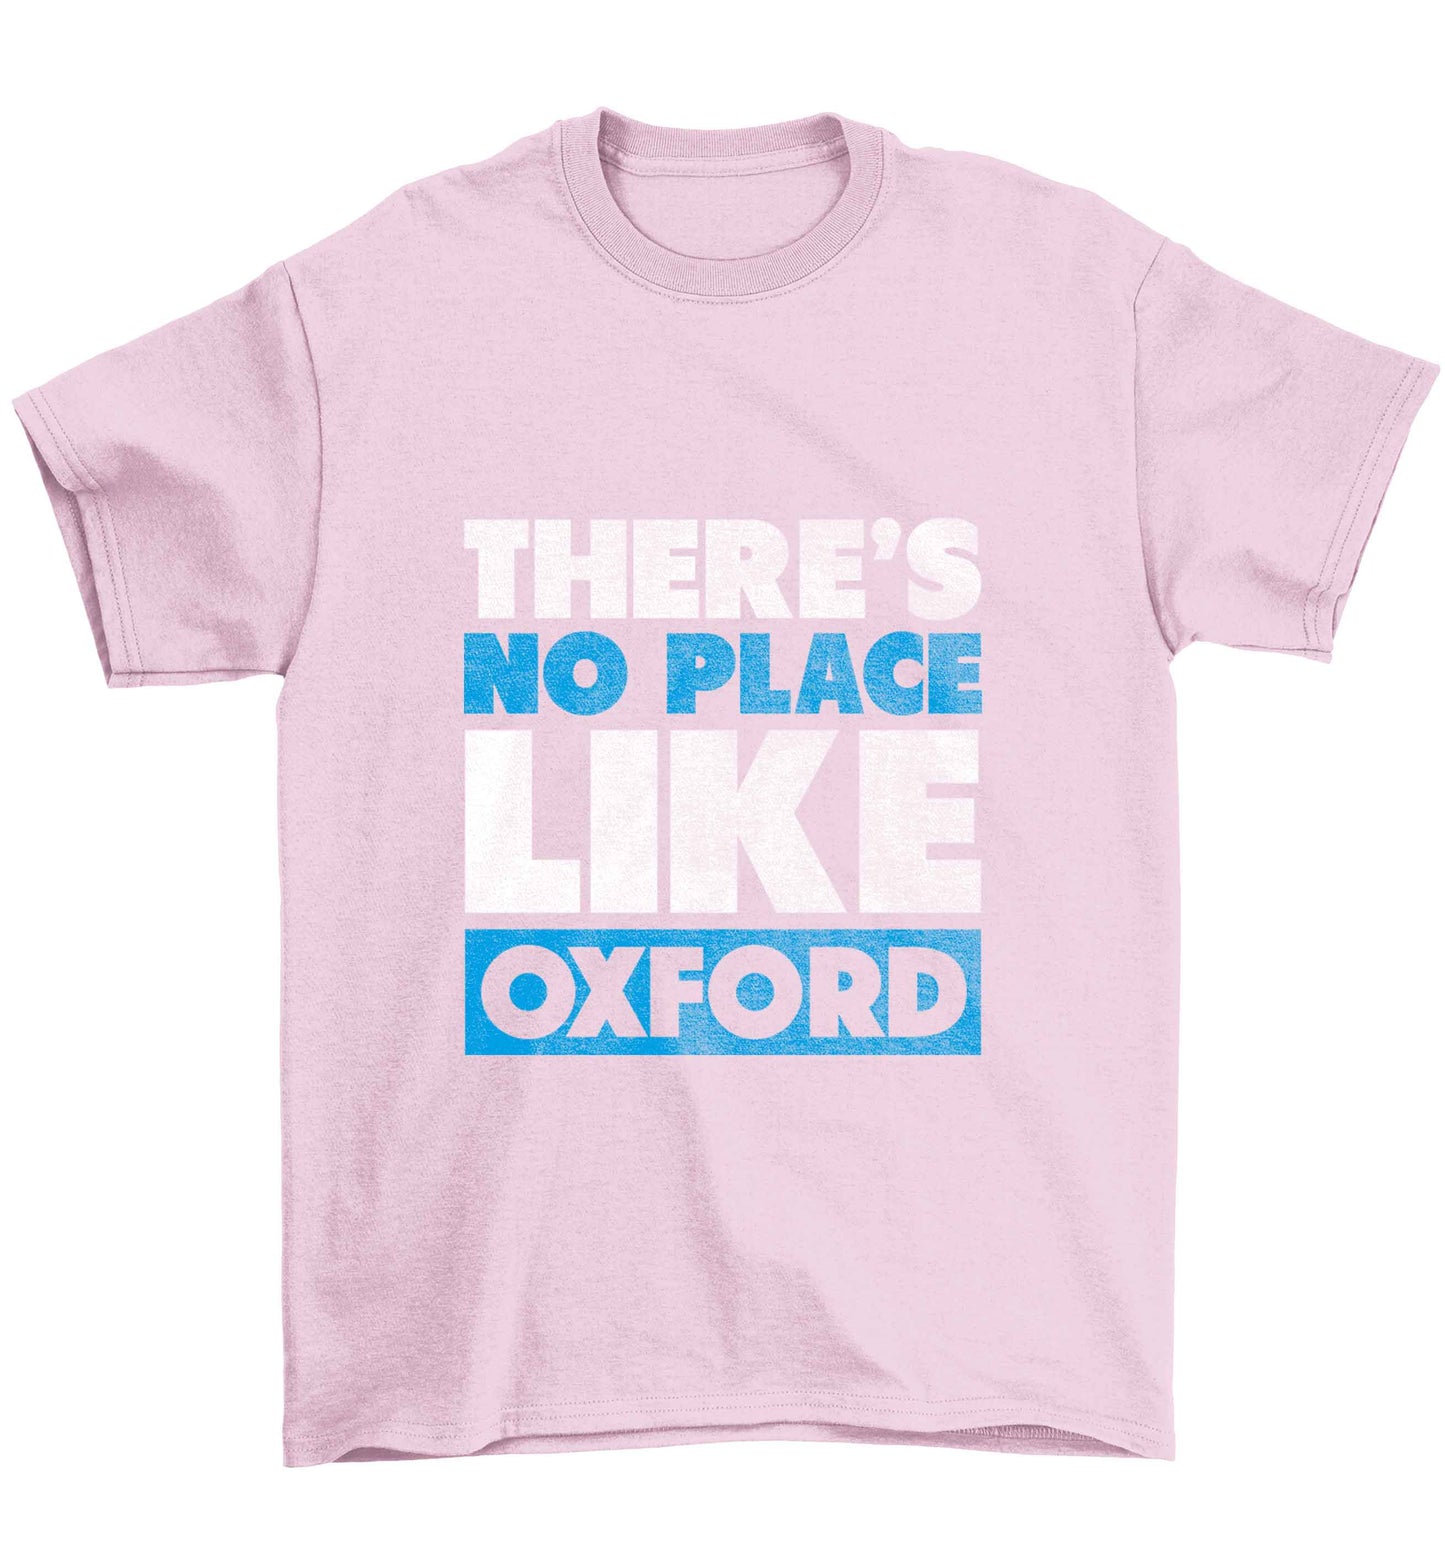 There's no place like Oxford Children's light pink Tshirt 12-13 Years